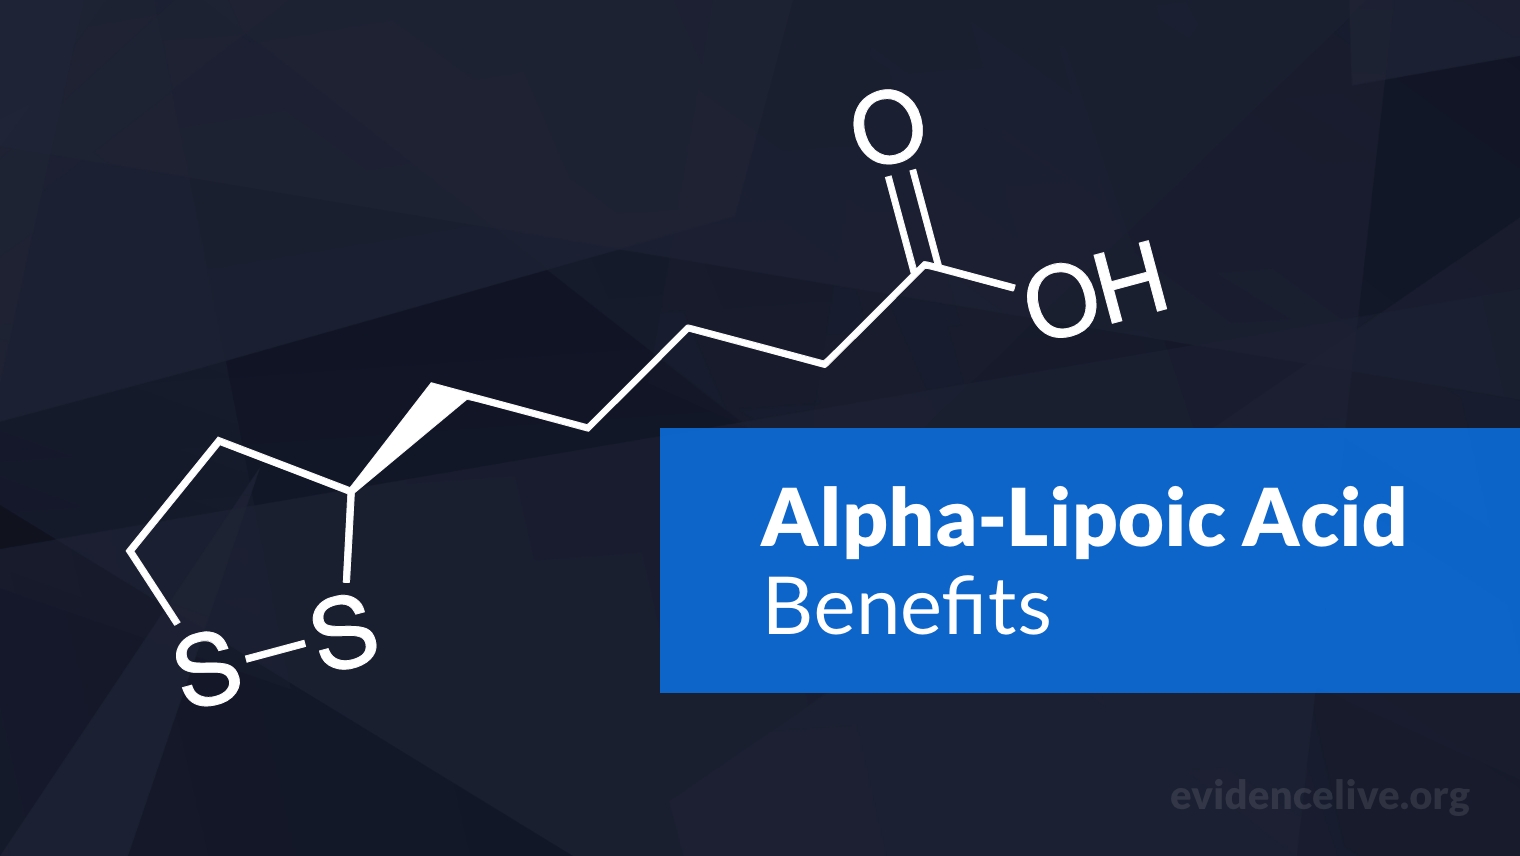 Alpha-Lipoic Acid: Benefits, Uses, Dosage, and Side Effects